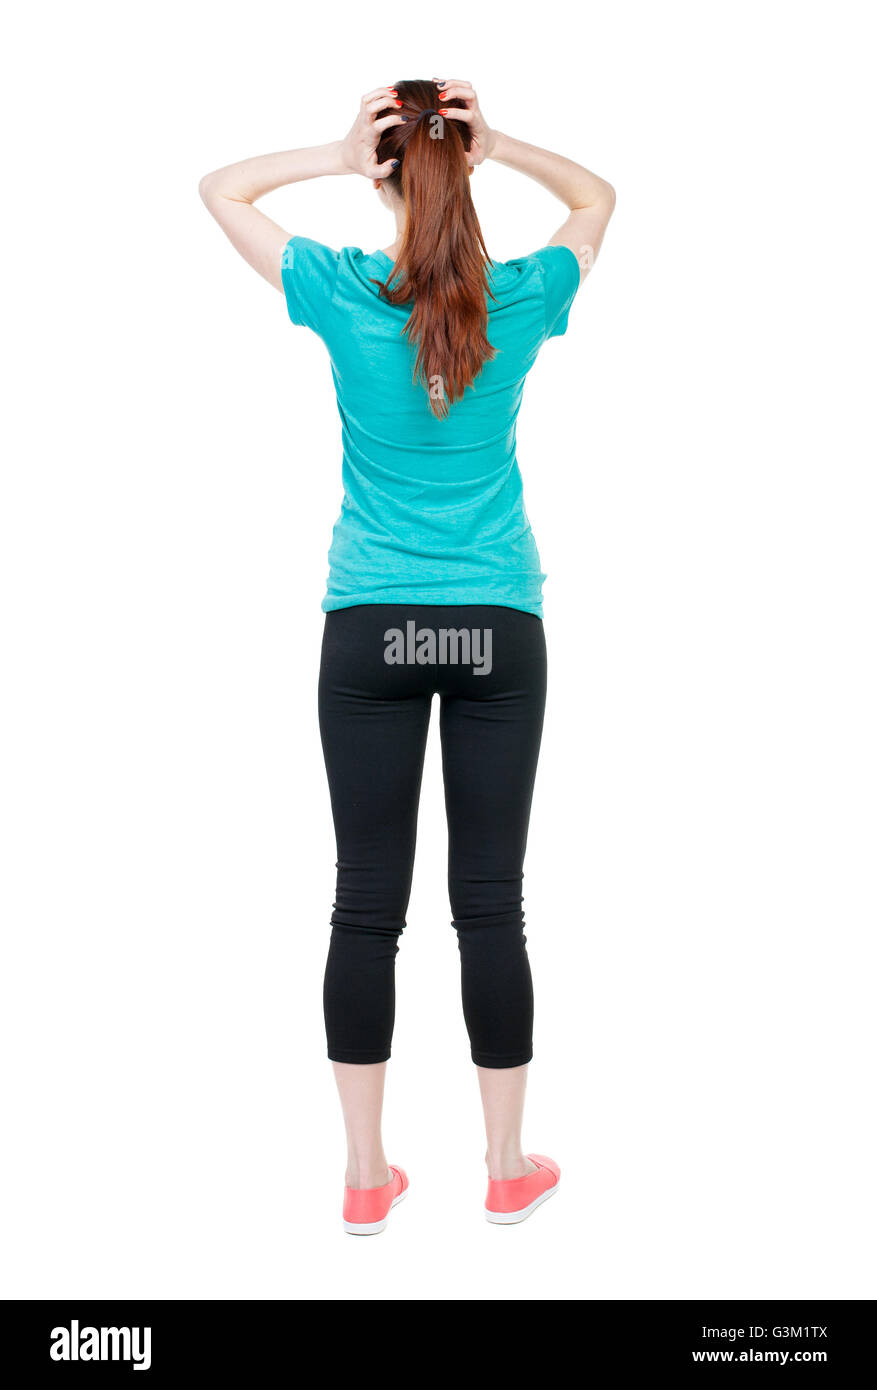 Back view of shocked woman. upset young girl. Rear view people collection. backside view of person. Isolated over white background. Sports girl clutching her hands behind her head. Stock Photo